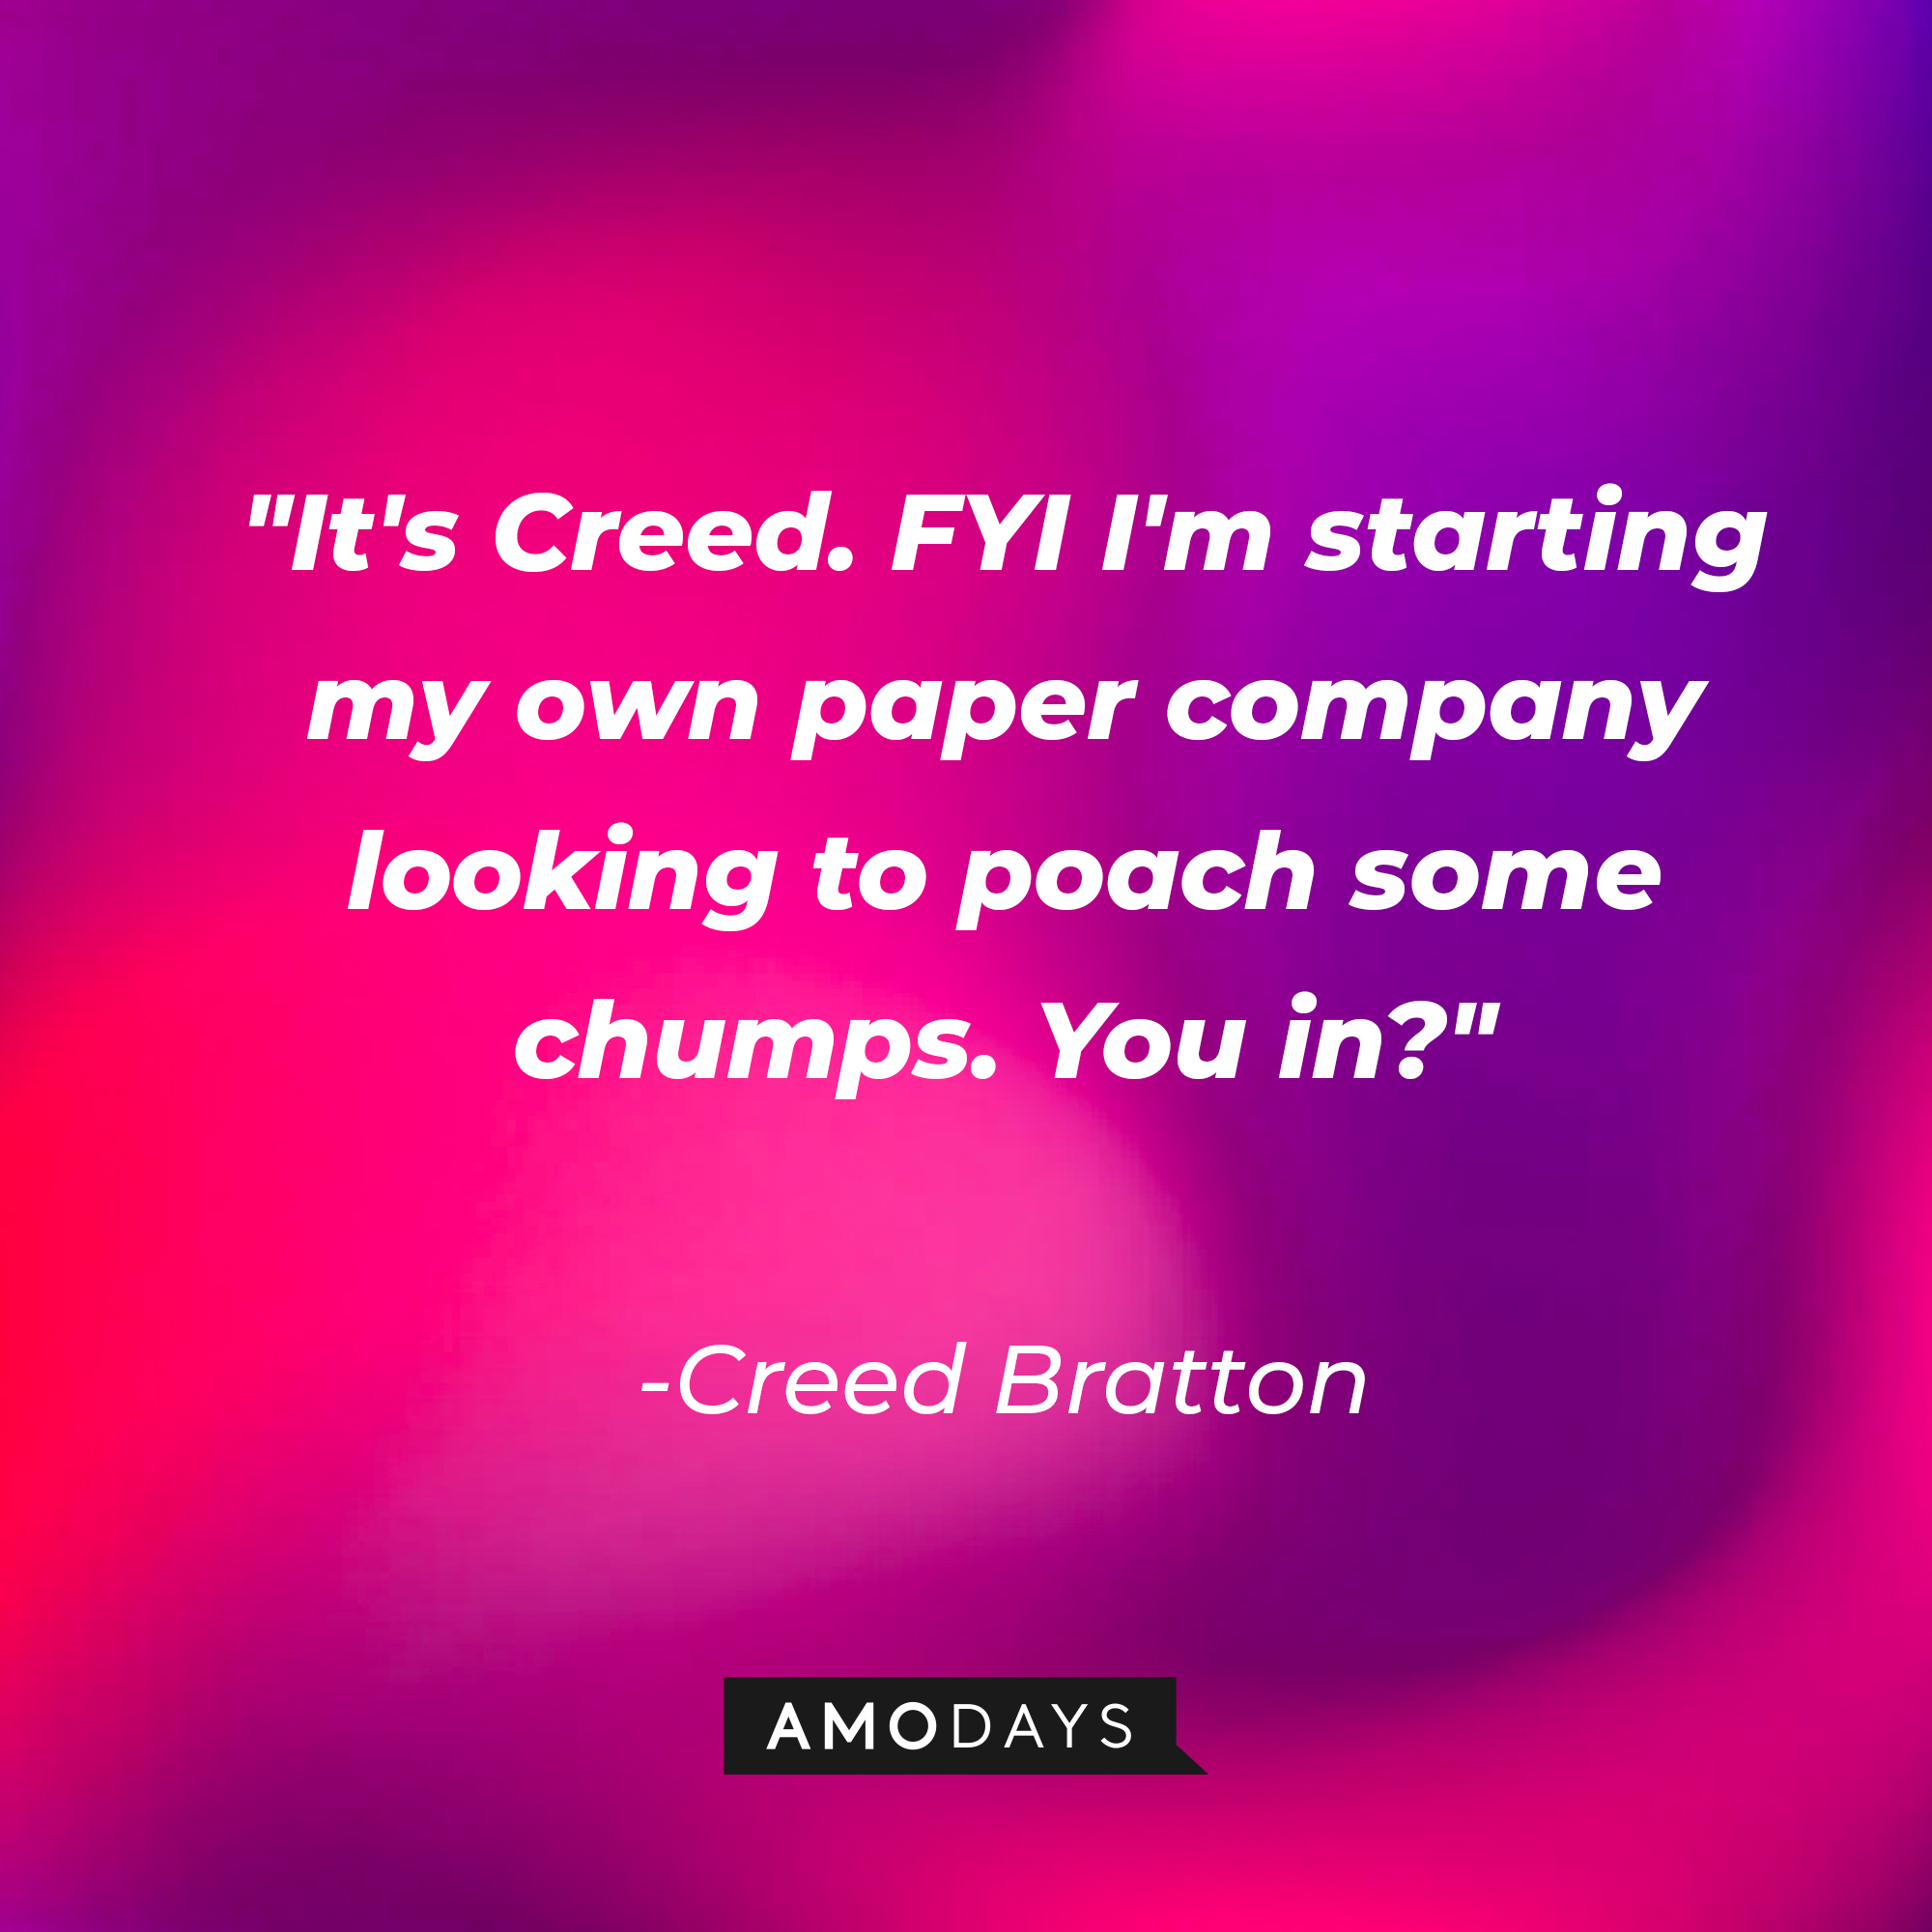 Creed Bratton's quote: "It's Creed. FYI I'm starting my own paper company looking to poach some chumps. You in?" | Source: AmoDays